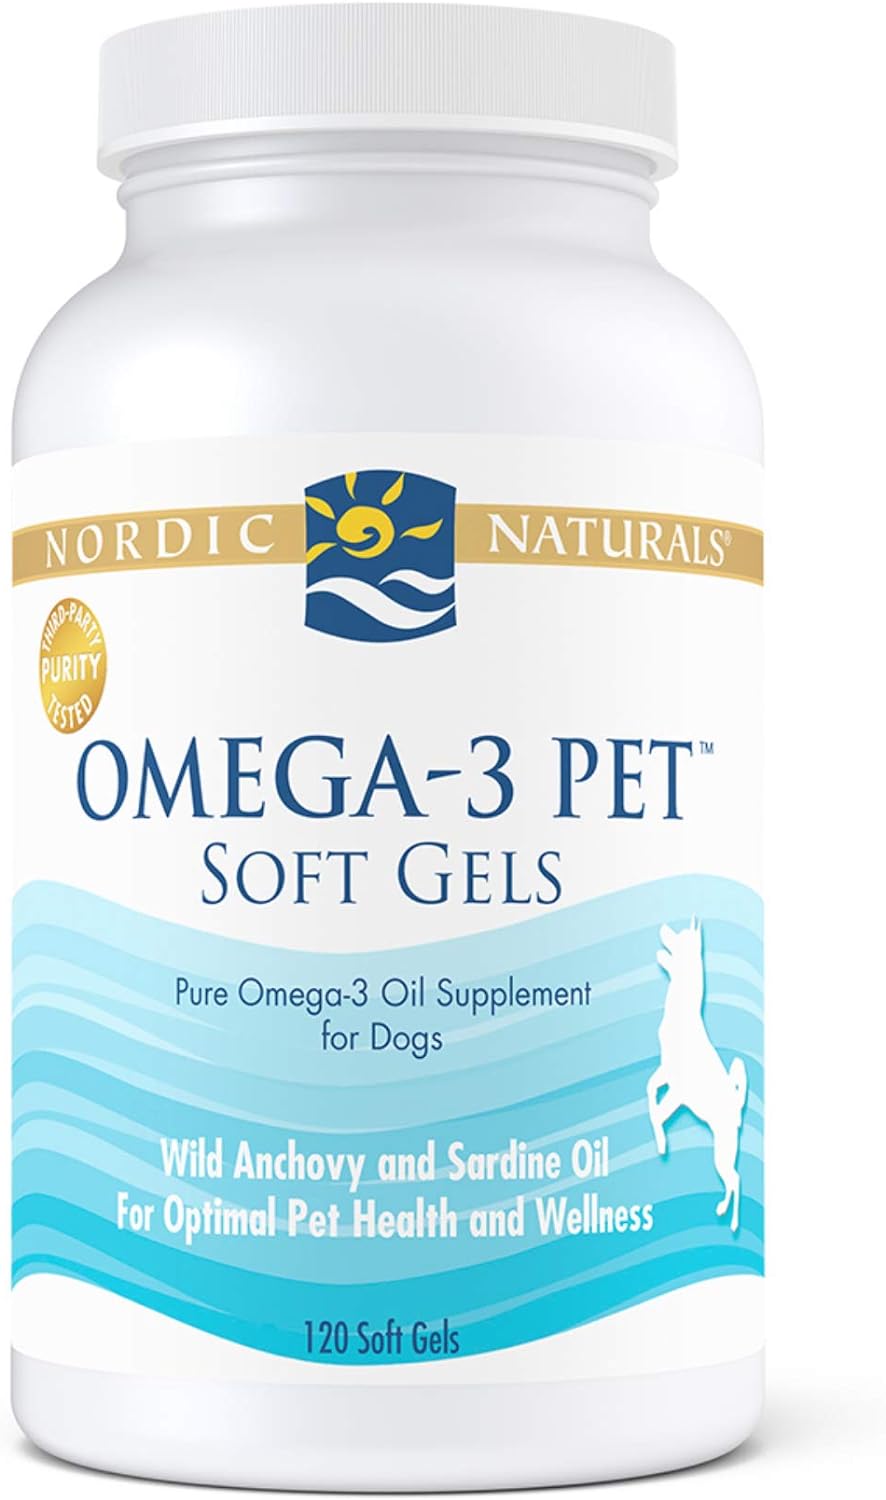 Nordic Naturals Omega-3 Pet, Unflavored - 120 Soft Gels - 330 mg Omega-3 Per Soft Gel - Fish Oil for Dogs with EPA & DHA - Promotes Heart, Skin, Coat, Joint, & Immune Health